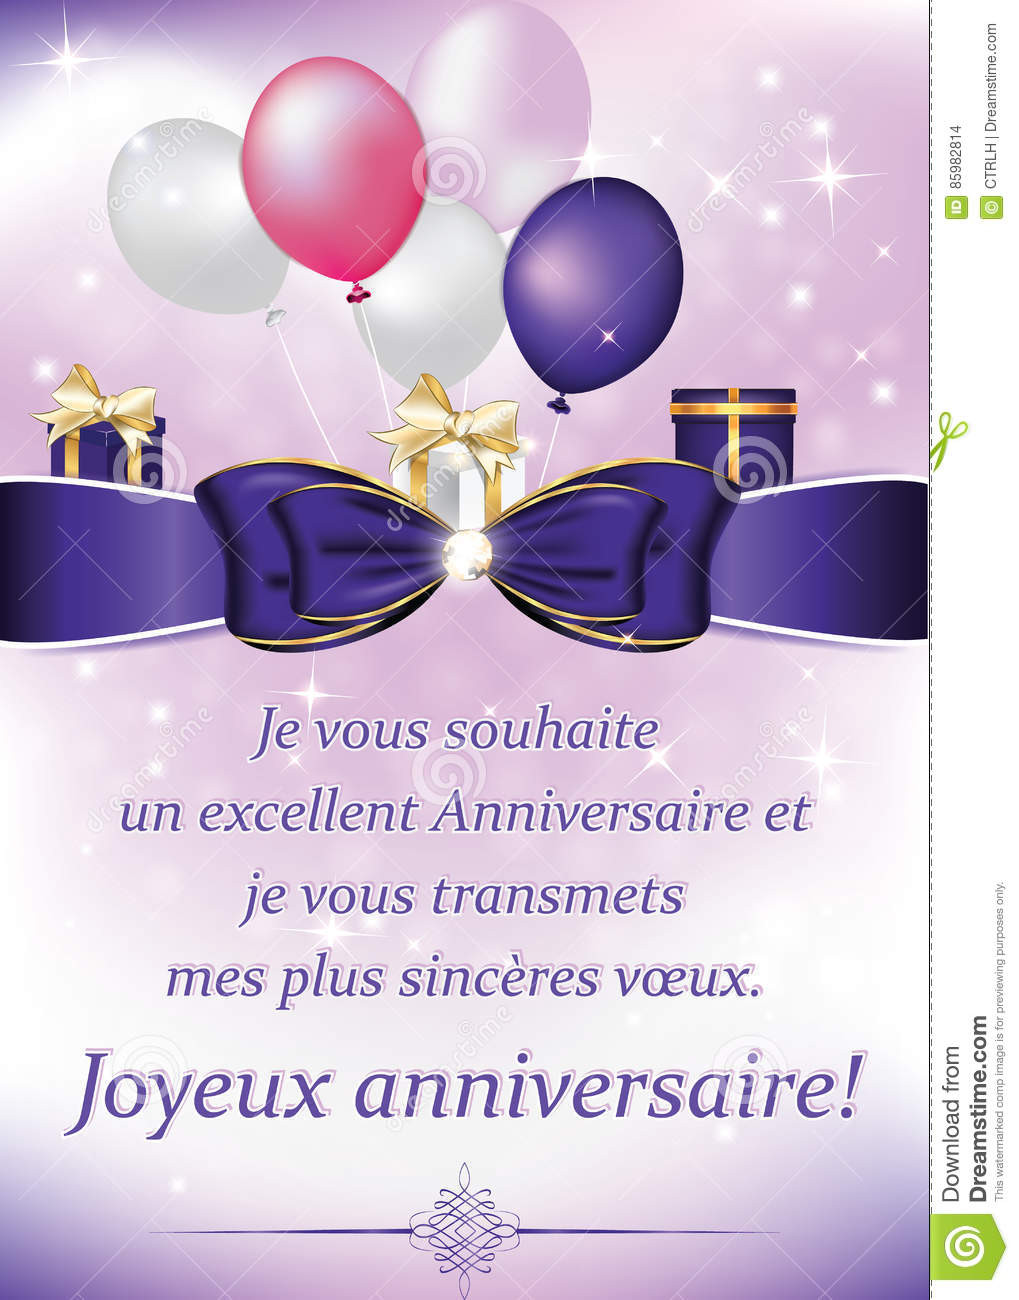 French Birthday Cards
 French Birthday Greeting Card With Balloons And Gifts